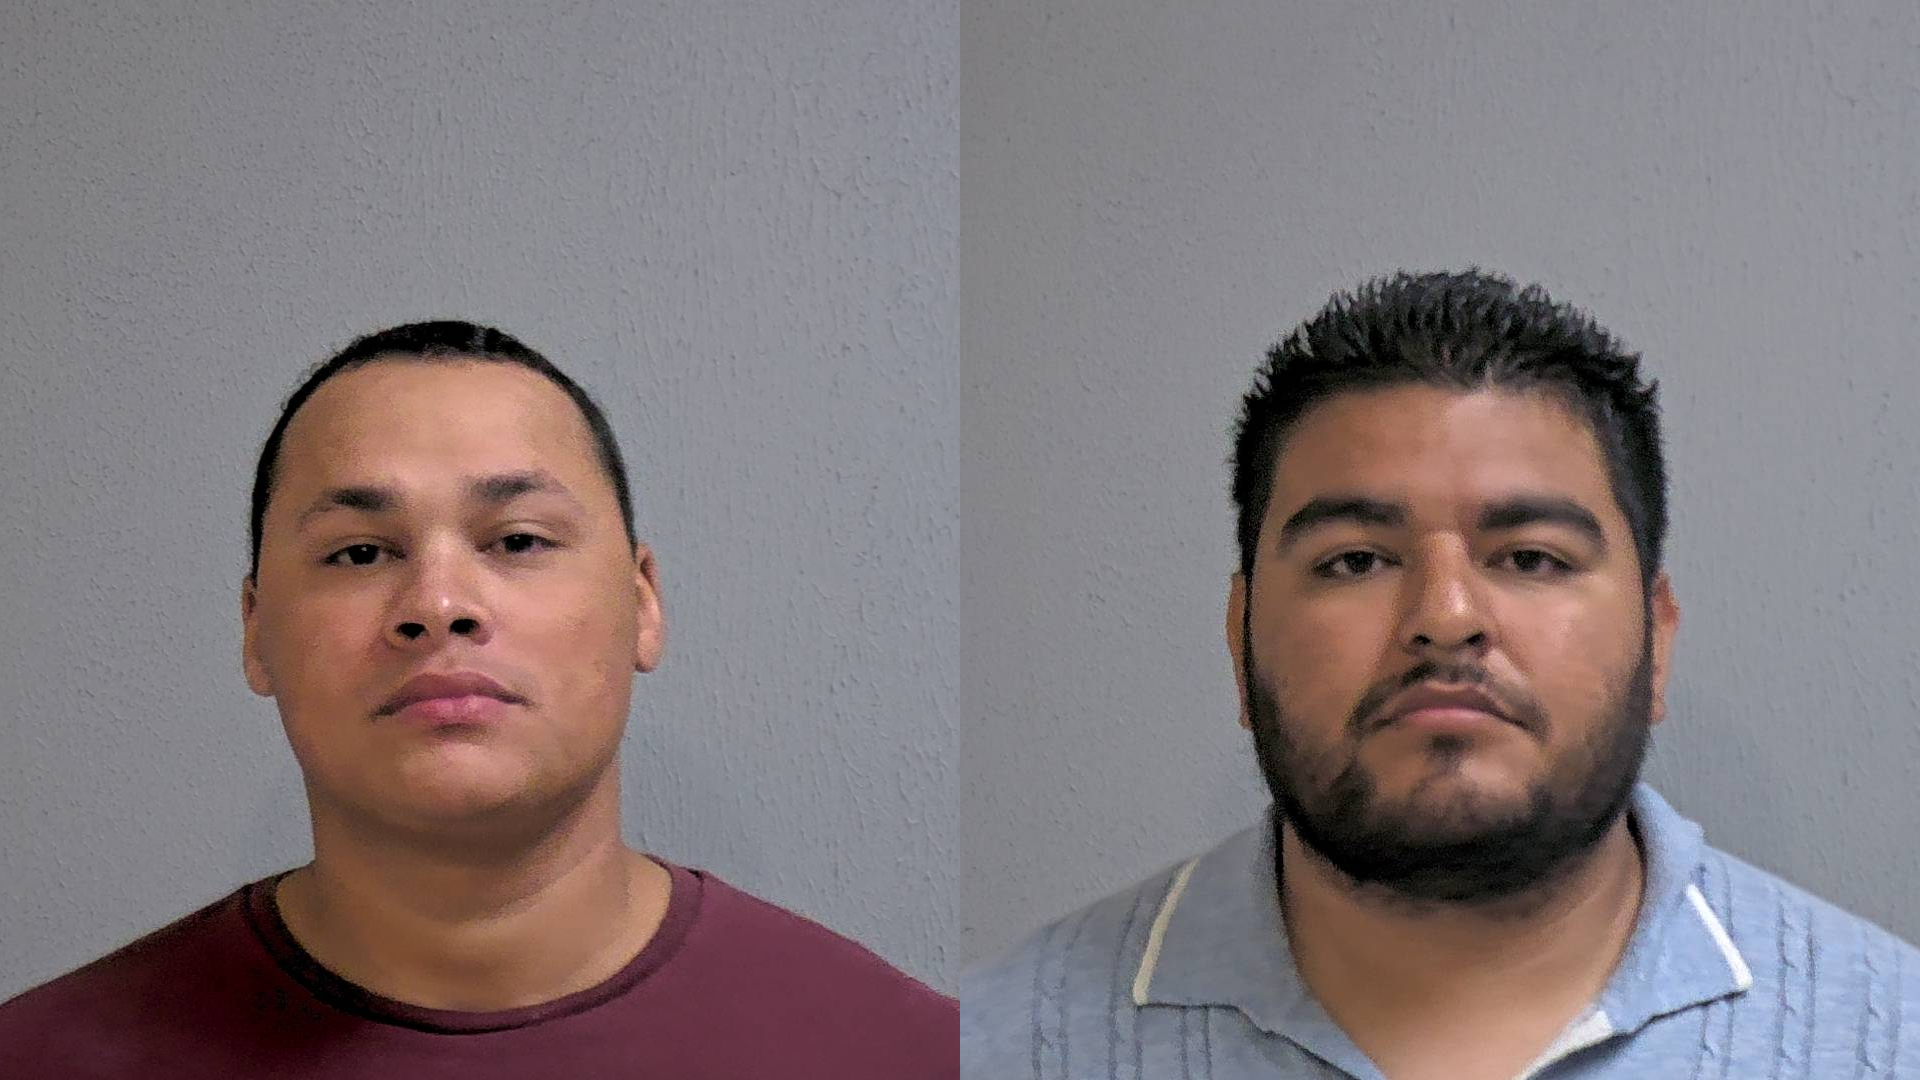 Former Hidalgo County detention officers punched inmates in three incidents